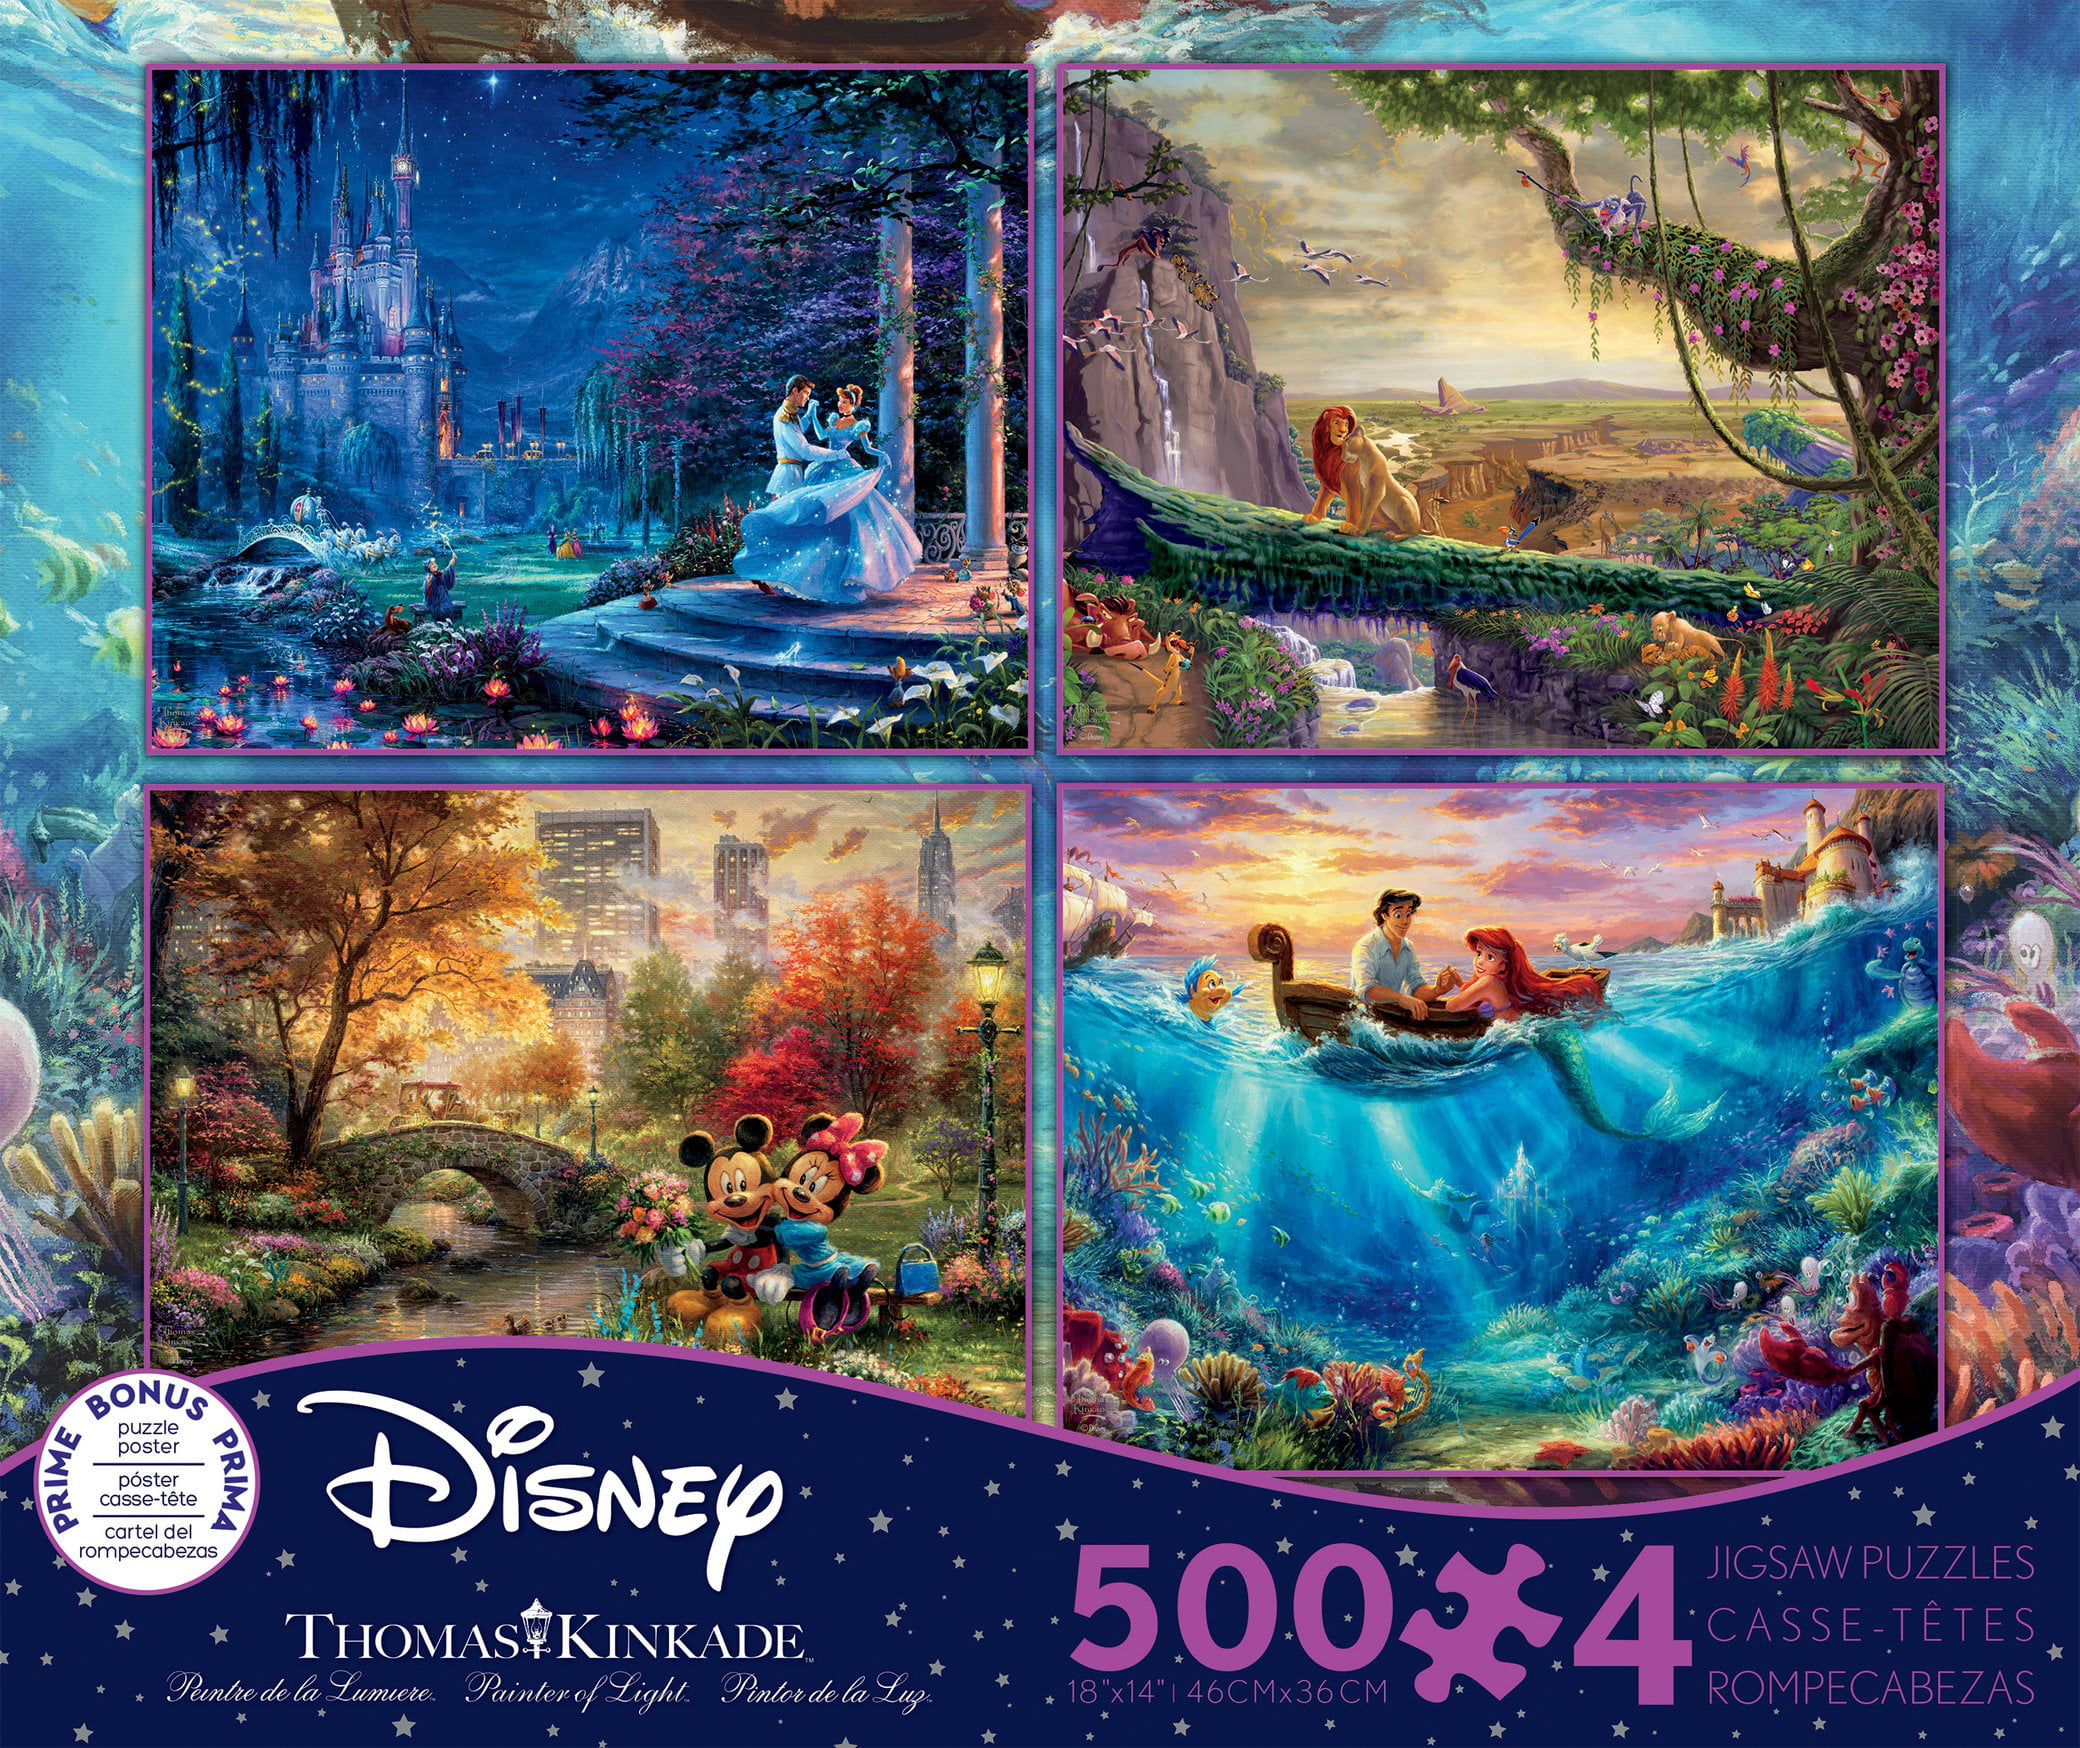 500 Pieces for sale online Ceaco 3663-01 4-1 Multi-Pack Thomas Kinkade Disney Jigsaw Puzzle 